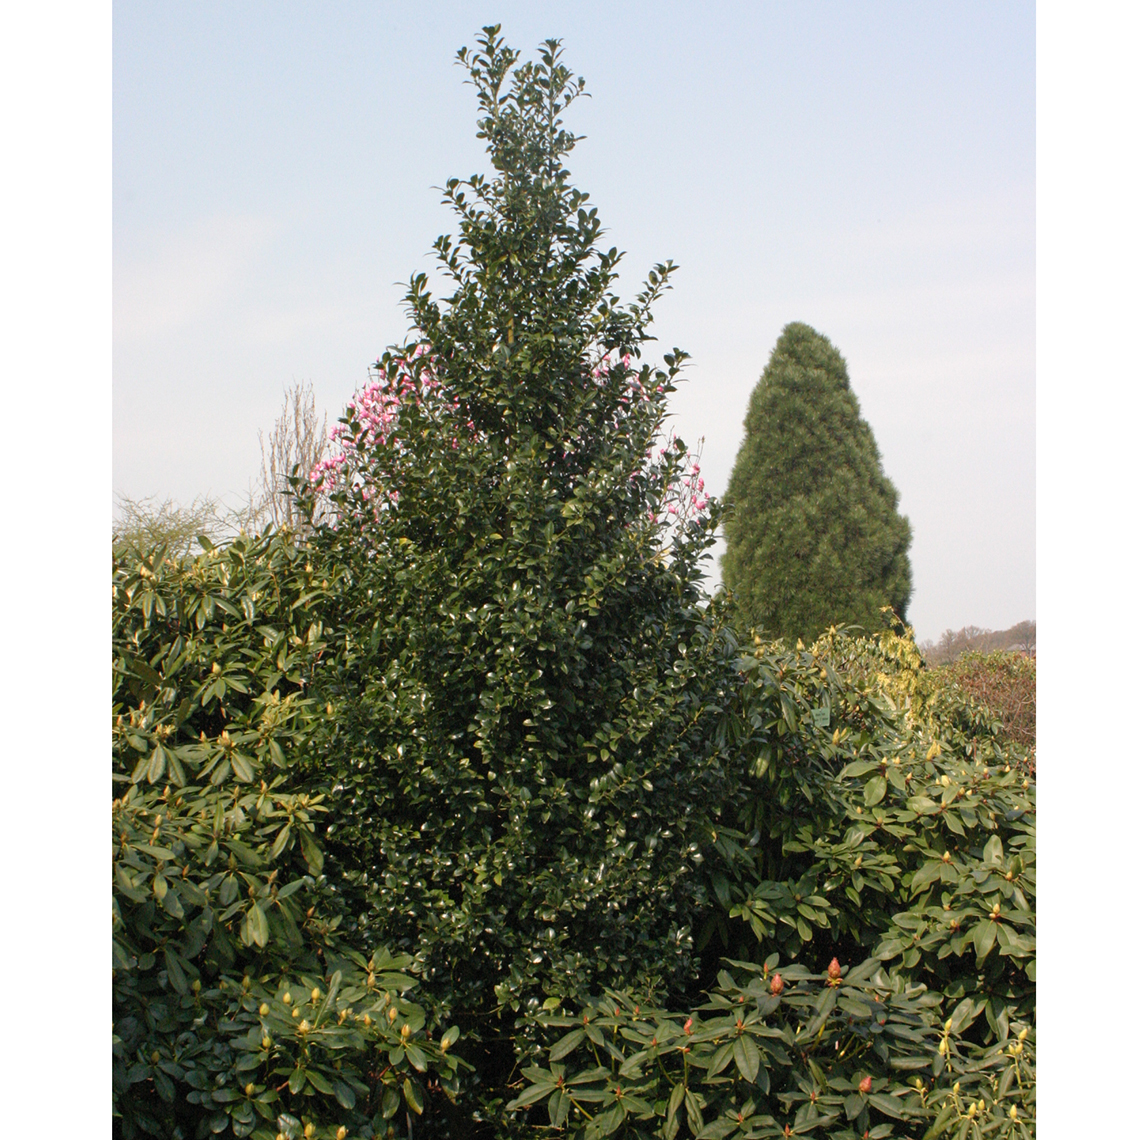 Tall and pyramidal Castle Spire blue holly in evergreen planting